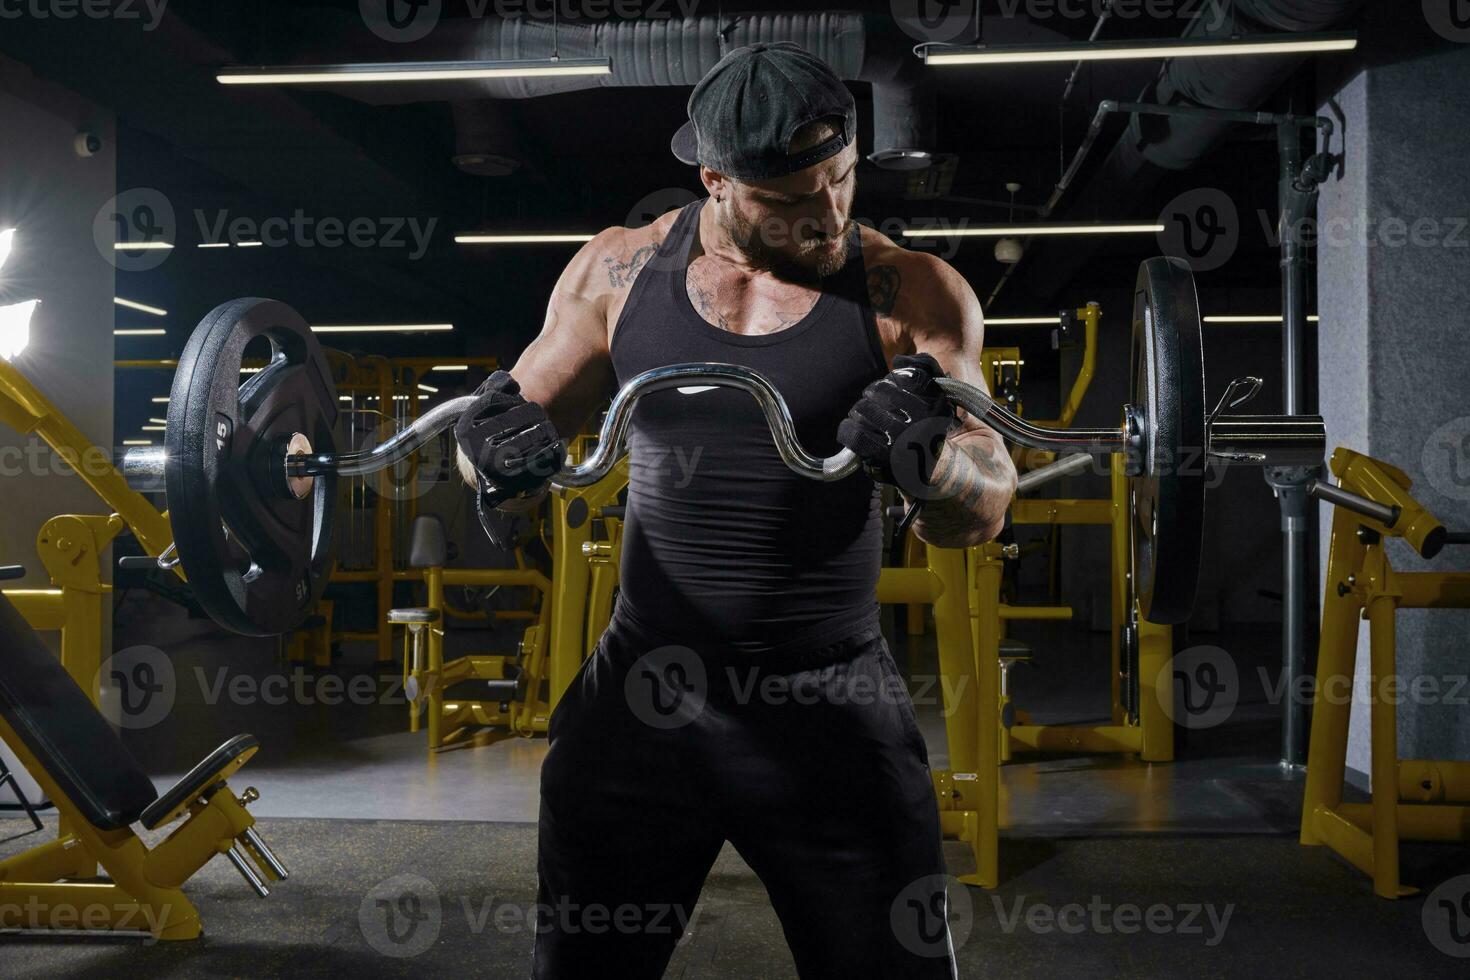 Bearded man in black sport gloves, shorts, vest and cap. Lifting a barbell, training his muscles, standing in dark gym with yellow equipment. Close up photo